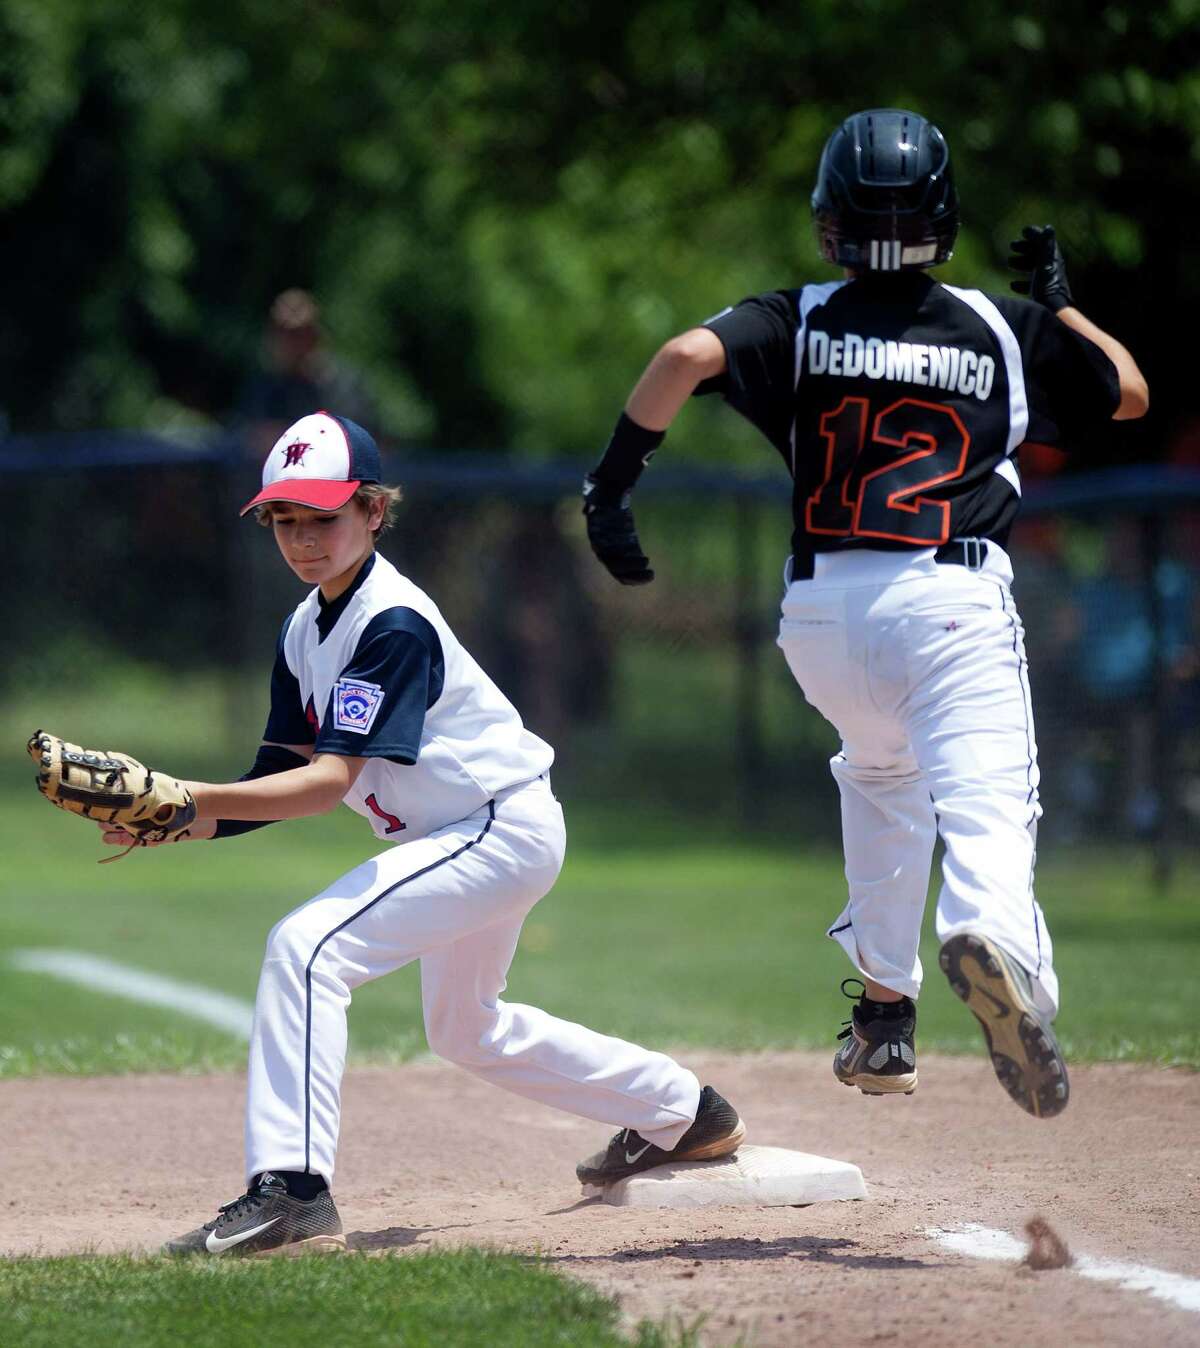 Orange's Drew DeDomenico is out at first as Westport baseman Chris Drbal catches the ball during Saturday's Little League Section 1 tournament game at Frank Noto Field in West Beach Park in Stamford, Conn., on July 20, 2013.